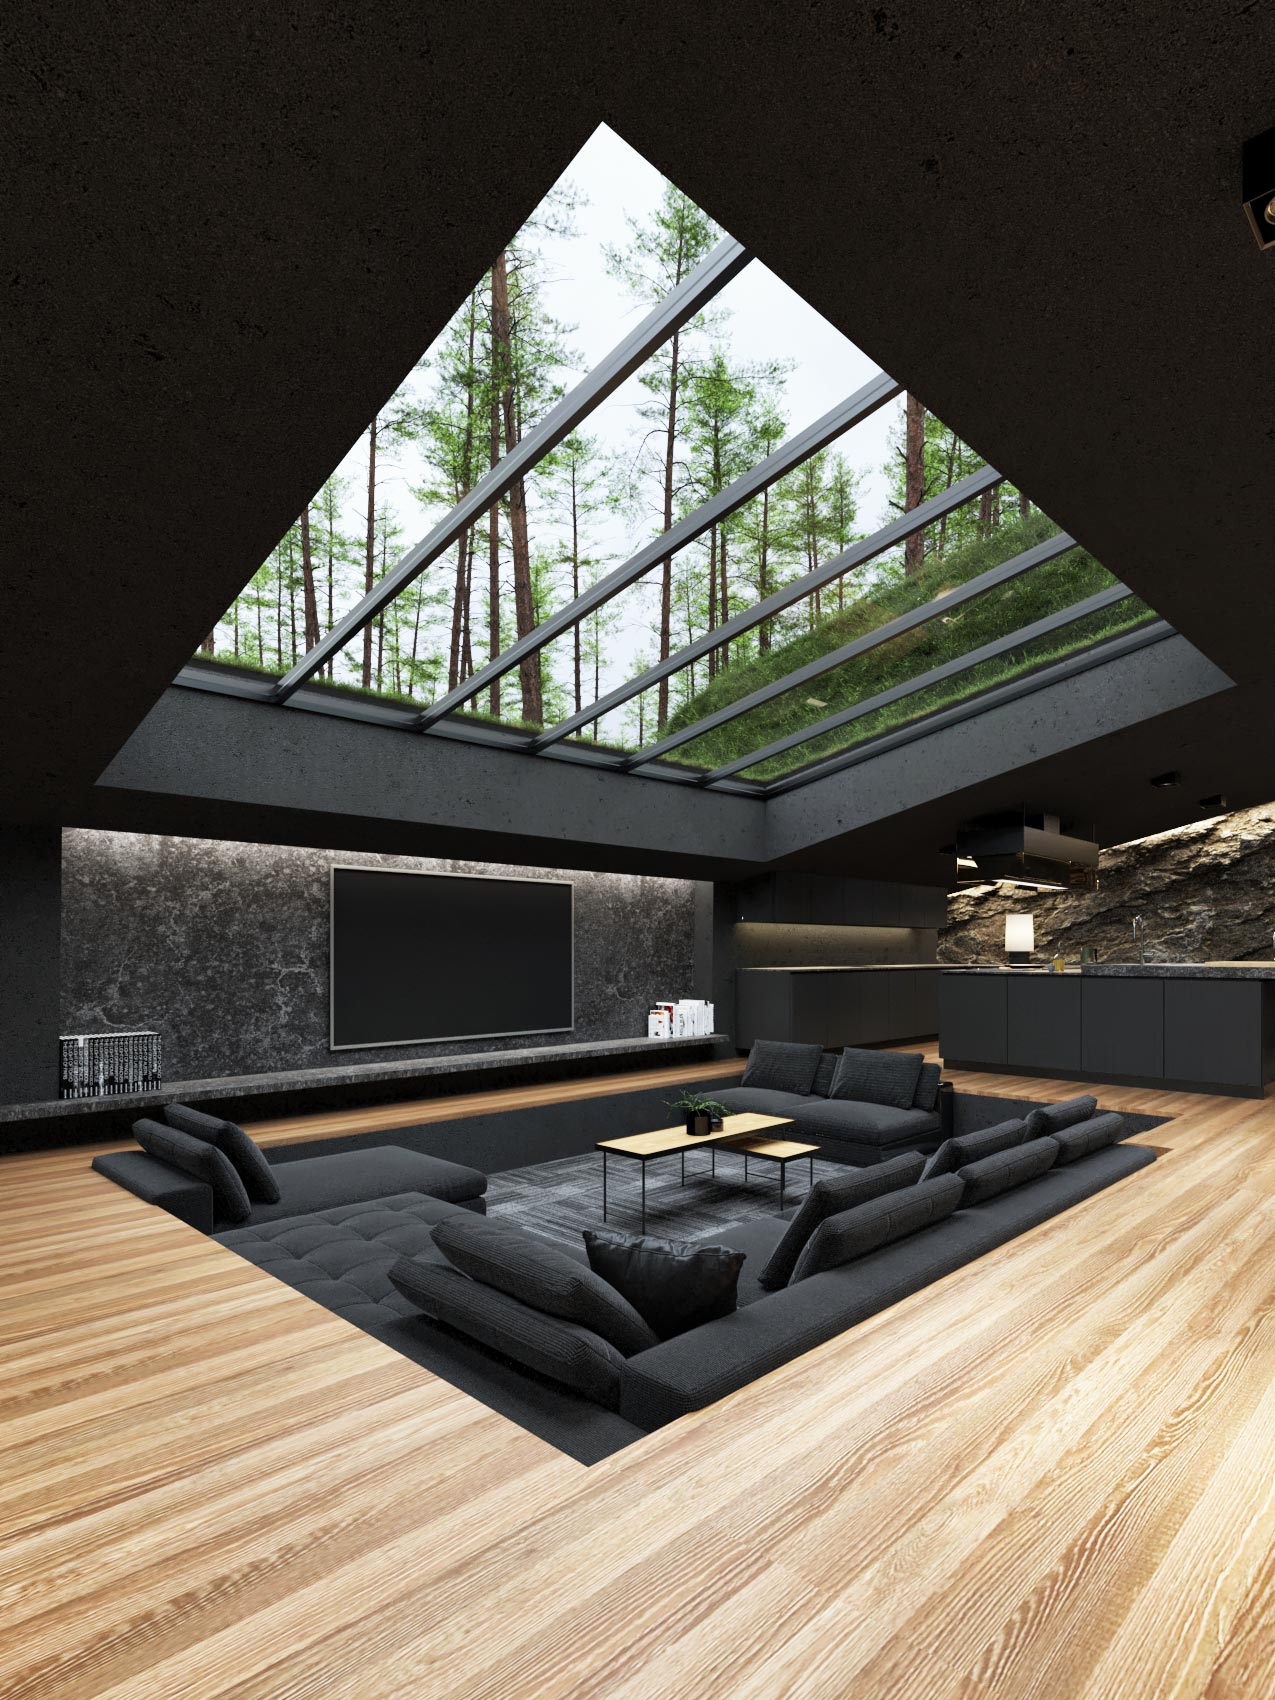 cozy living room with skylight in the ceiling let the natural light enters the room 